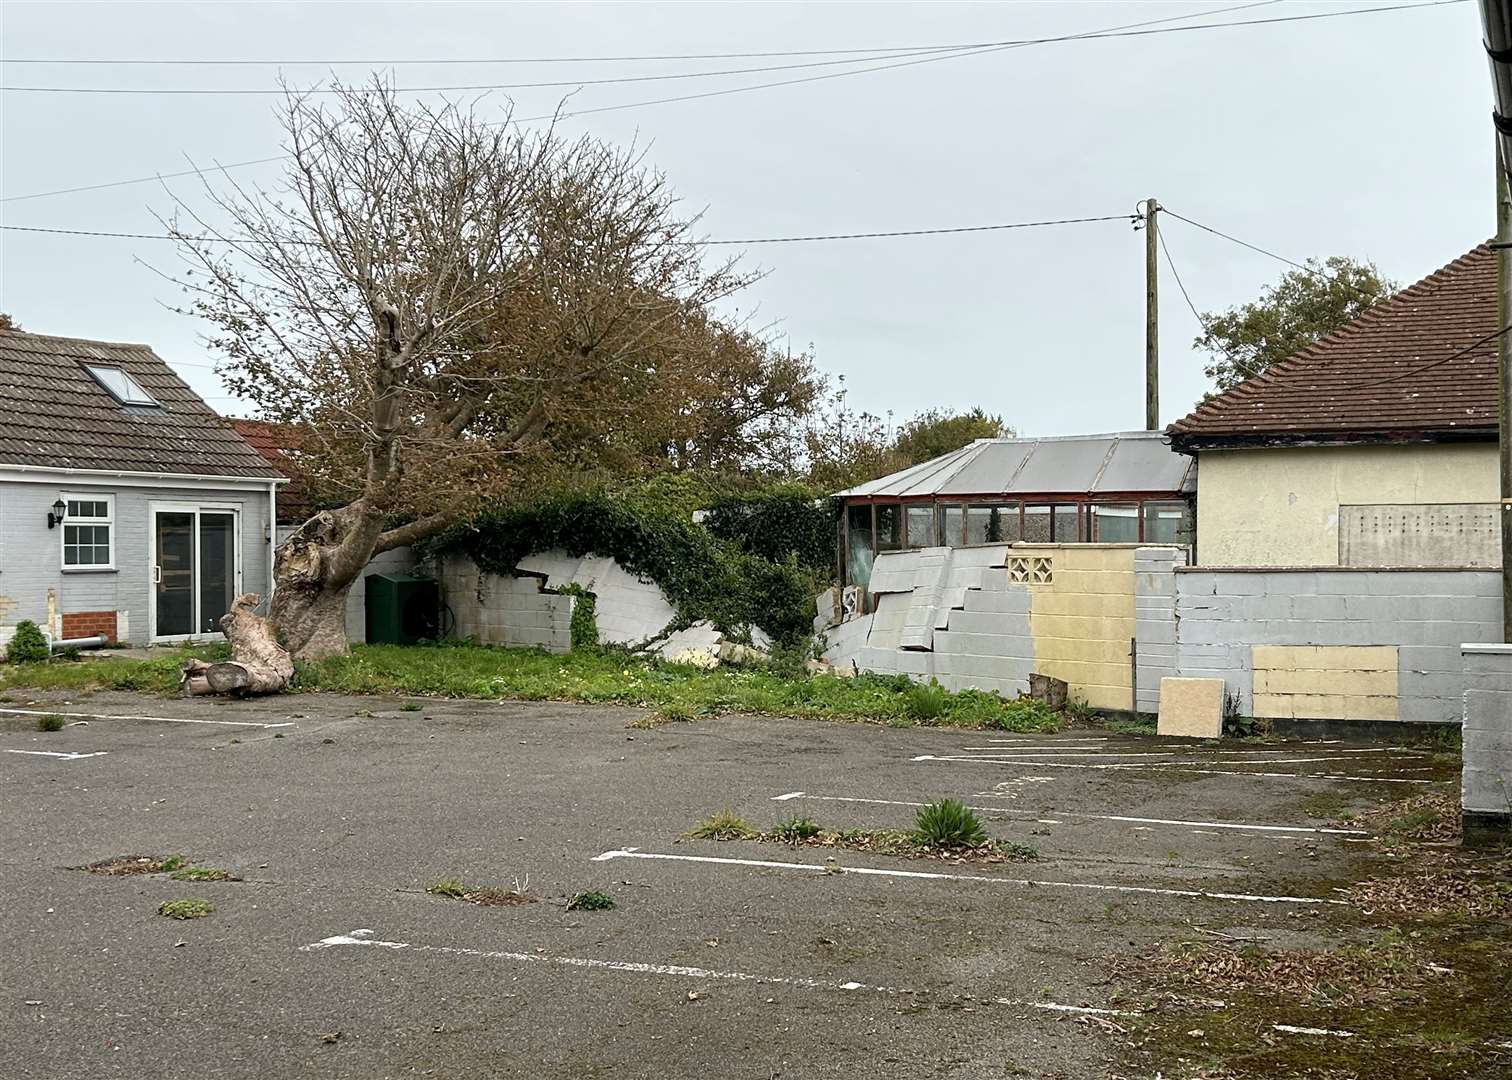 A wall has collapsed into a garden at the Lighthouse Inn based in Capel-le-Ferne